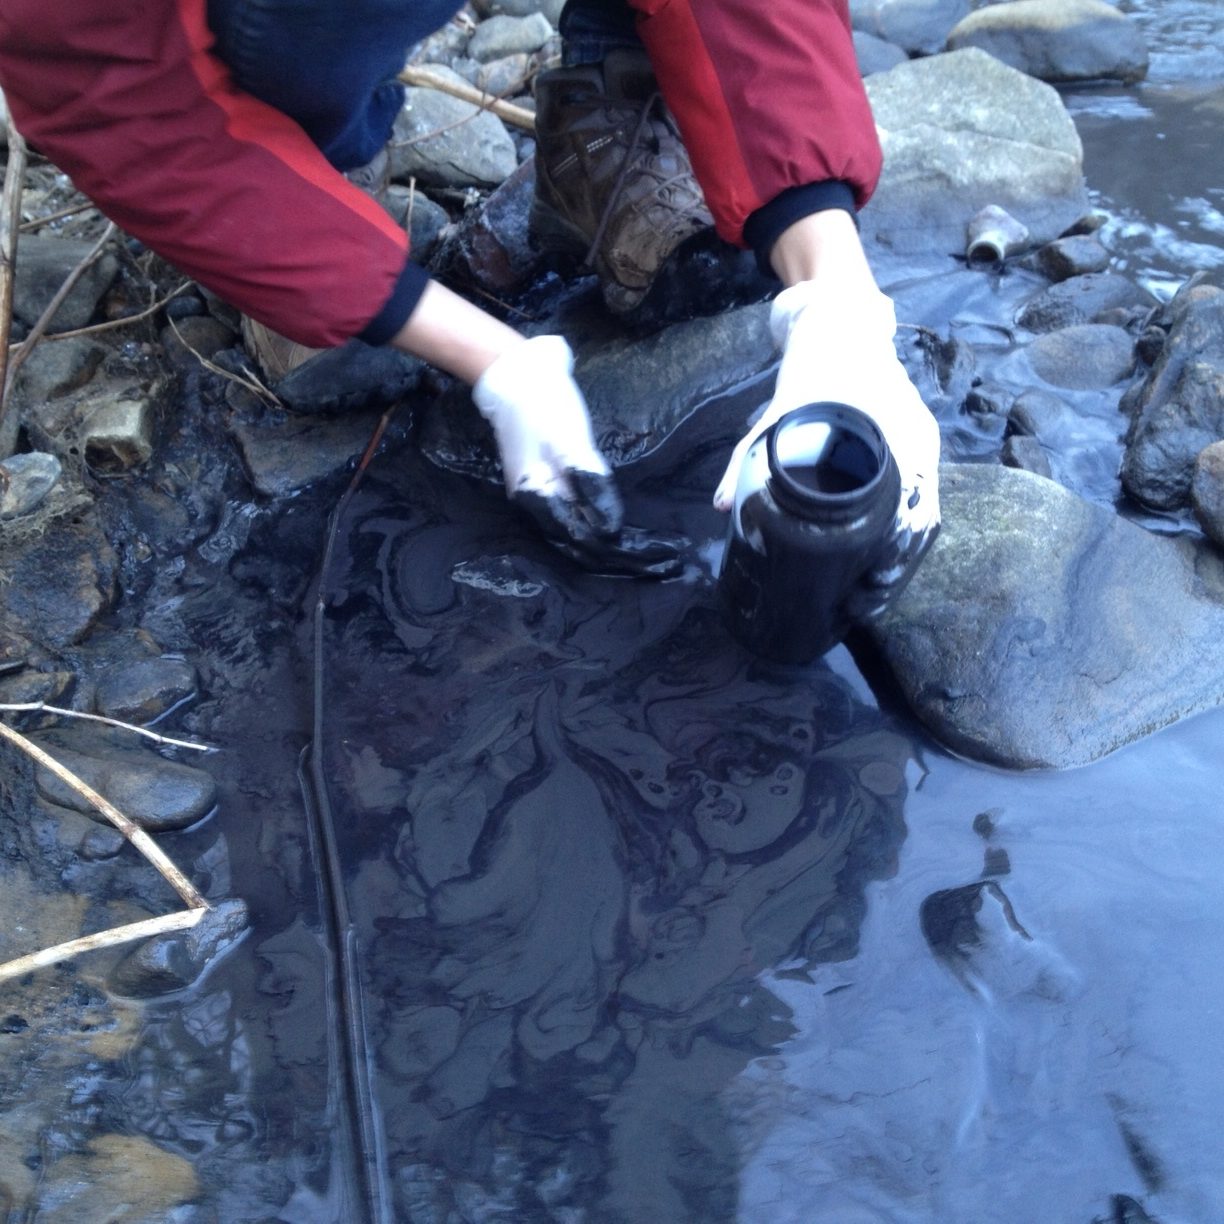 Erin Savage gathers samples at the site of the Fields Creek slurry spill in February 2014